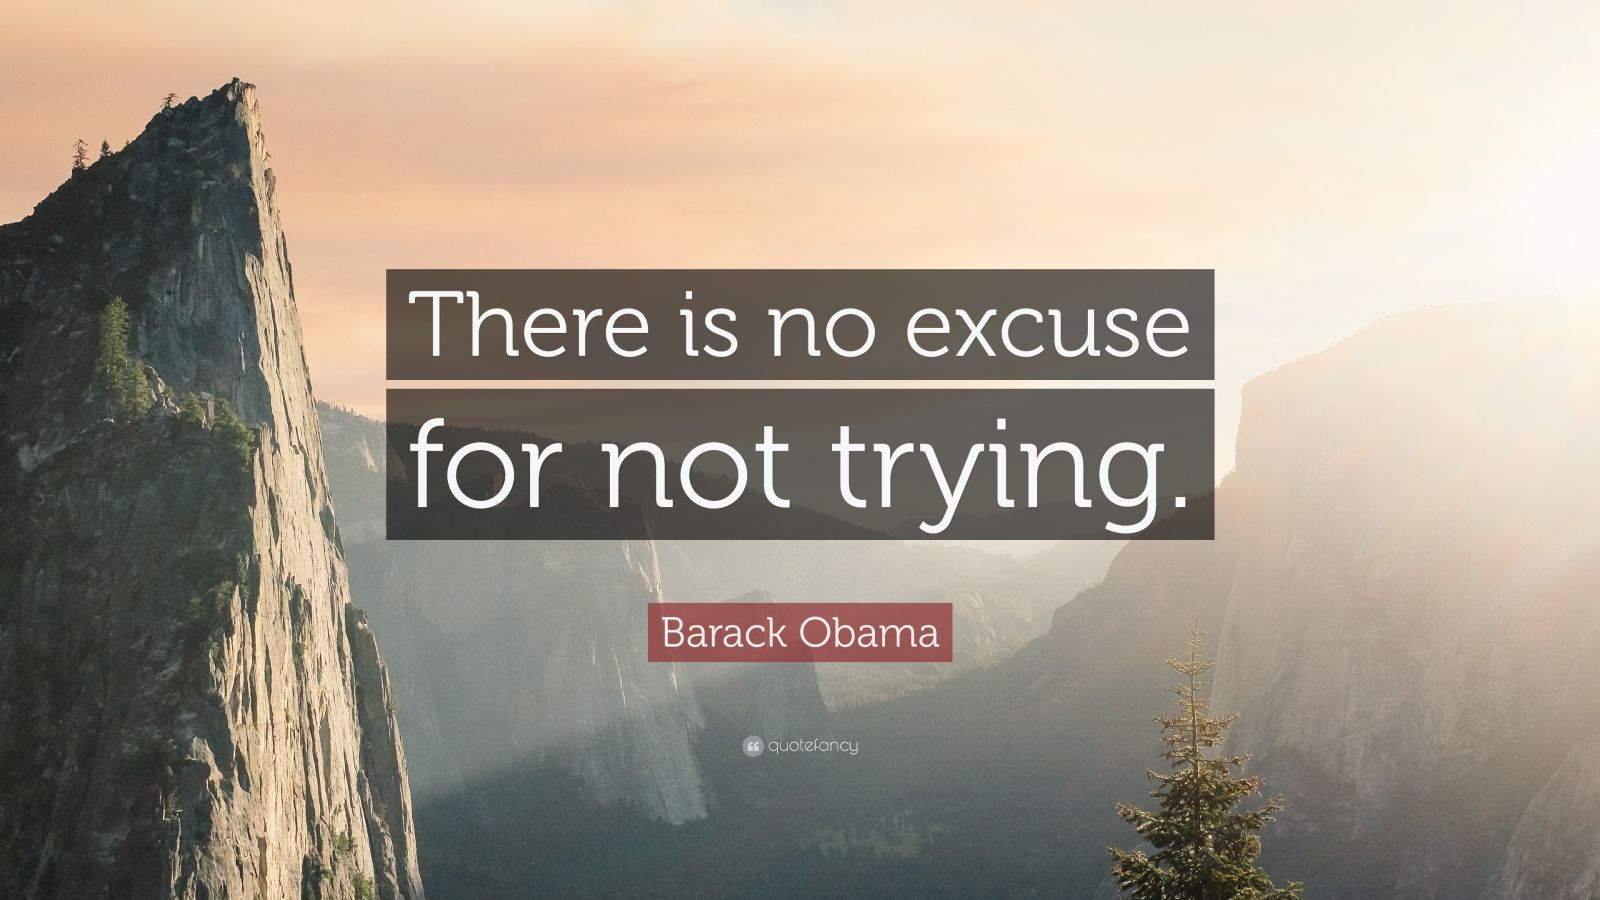 Barack Obama Quote: “There is no excuse for not trying.” (17 wallpapers